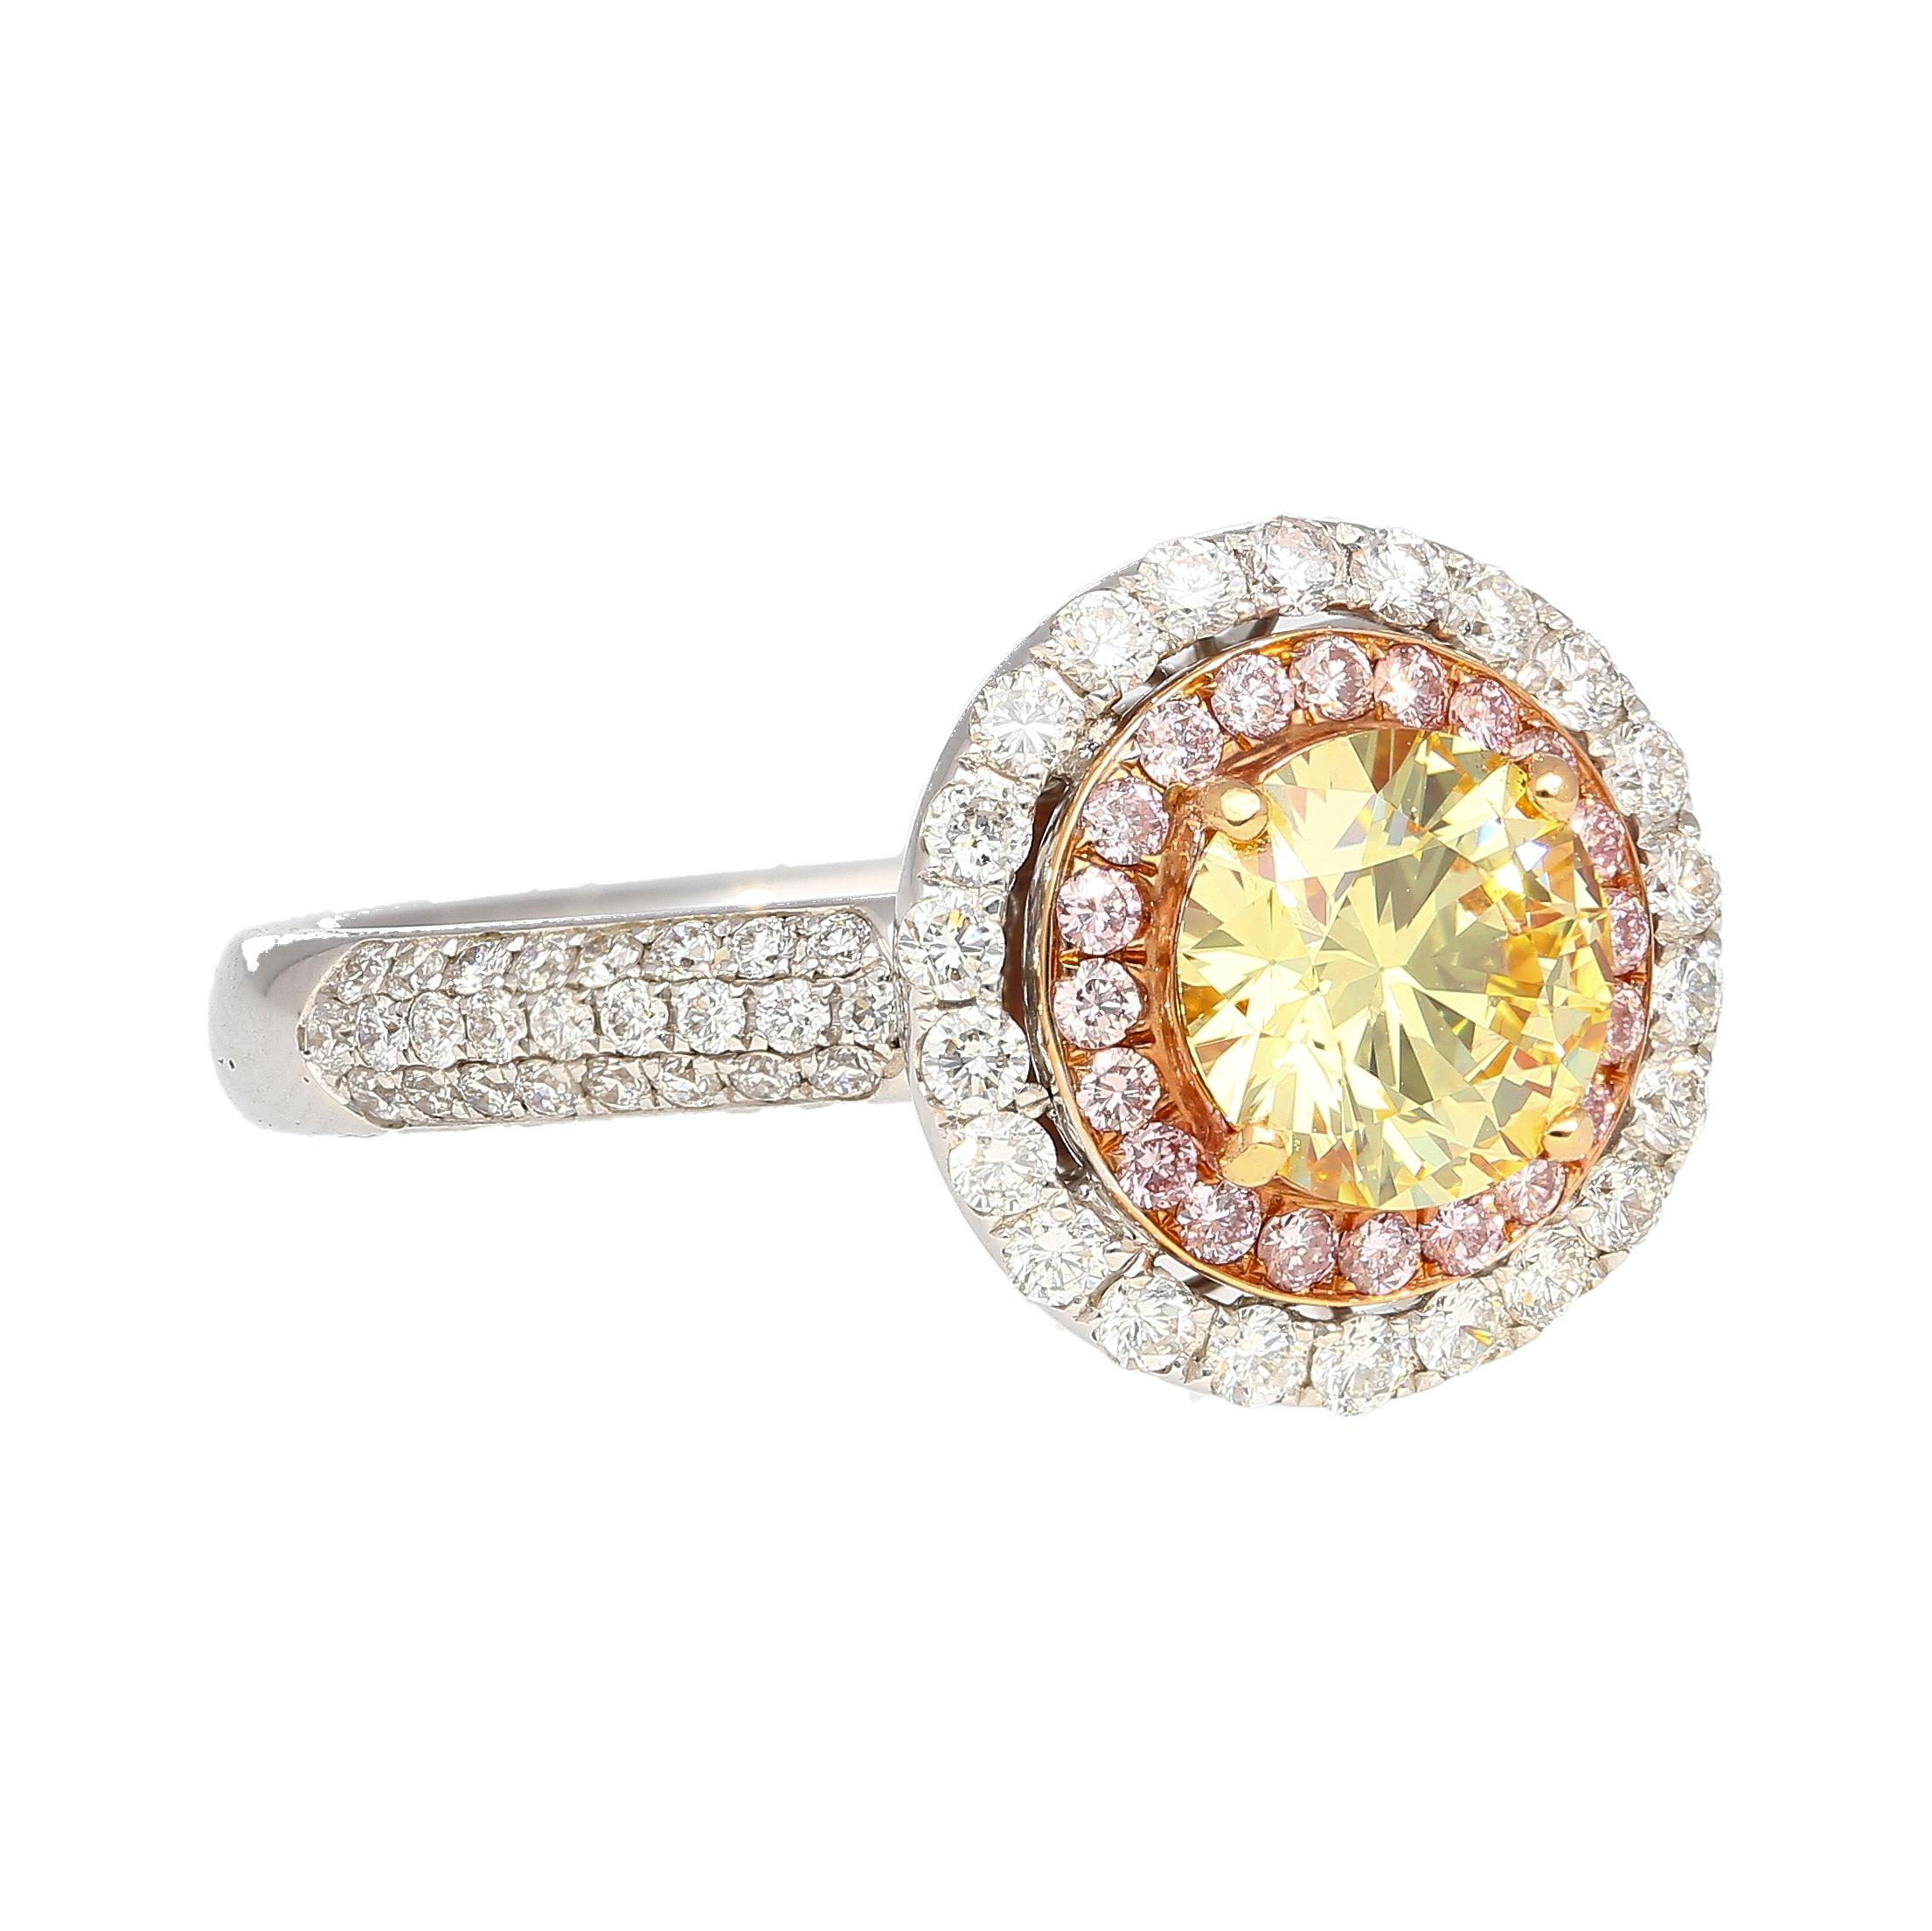 GIA certified 1.01 carat fancy yellow round brilliant cut diamond center stone ring, set in 18k solid gold. Set with a three-tone gold setting. A white gold shank, rose gold halo, and yellow gold prongs. A gorgeous contact of colors complementing